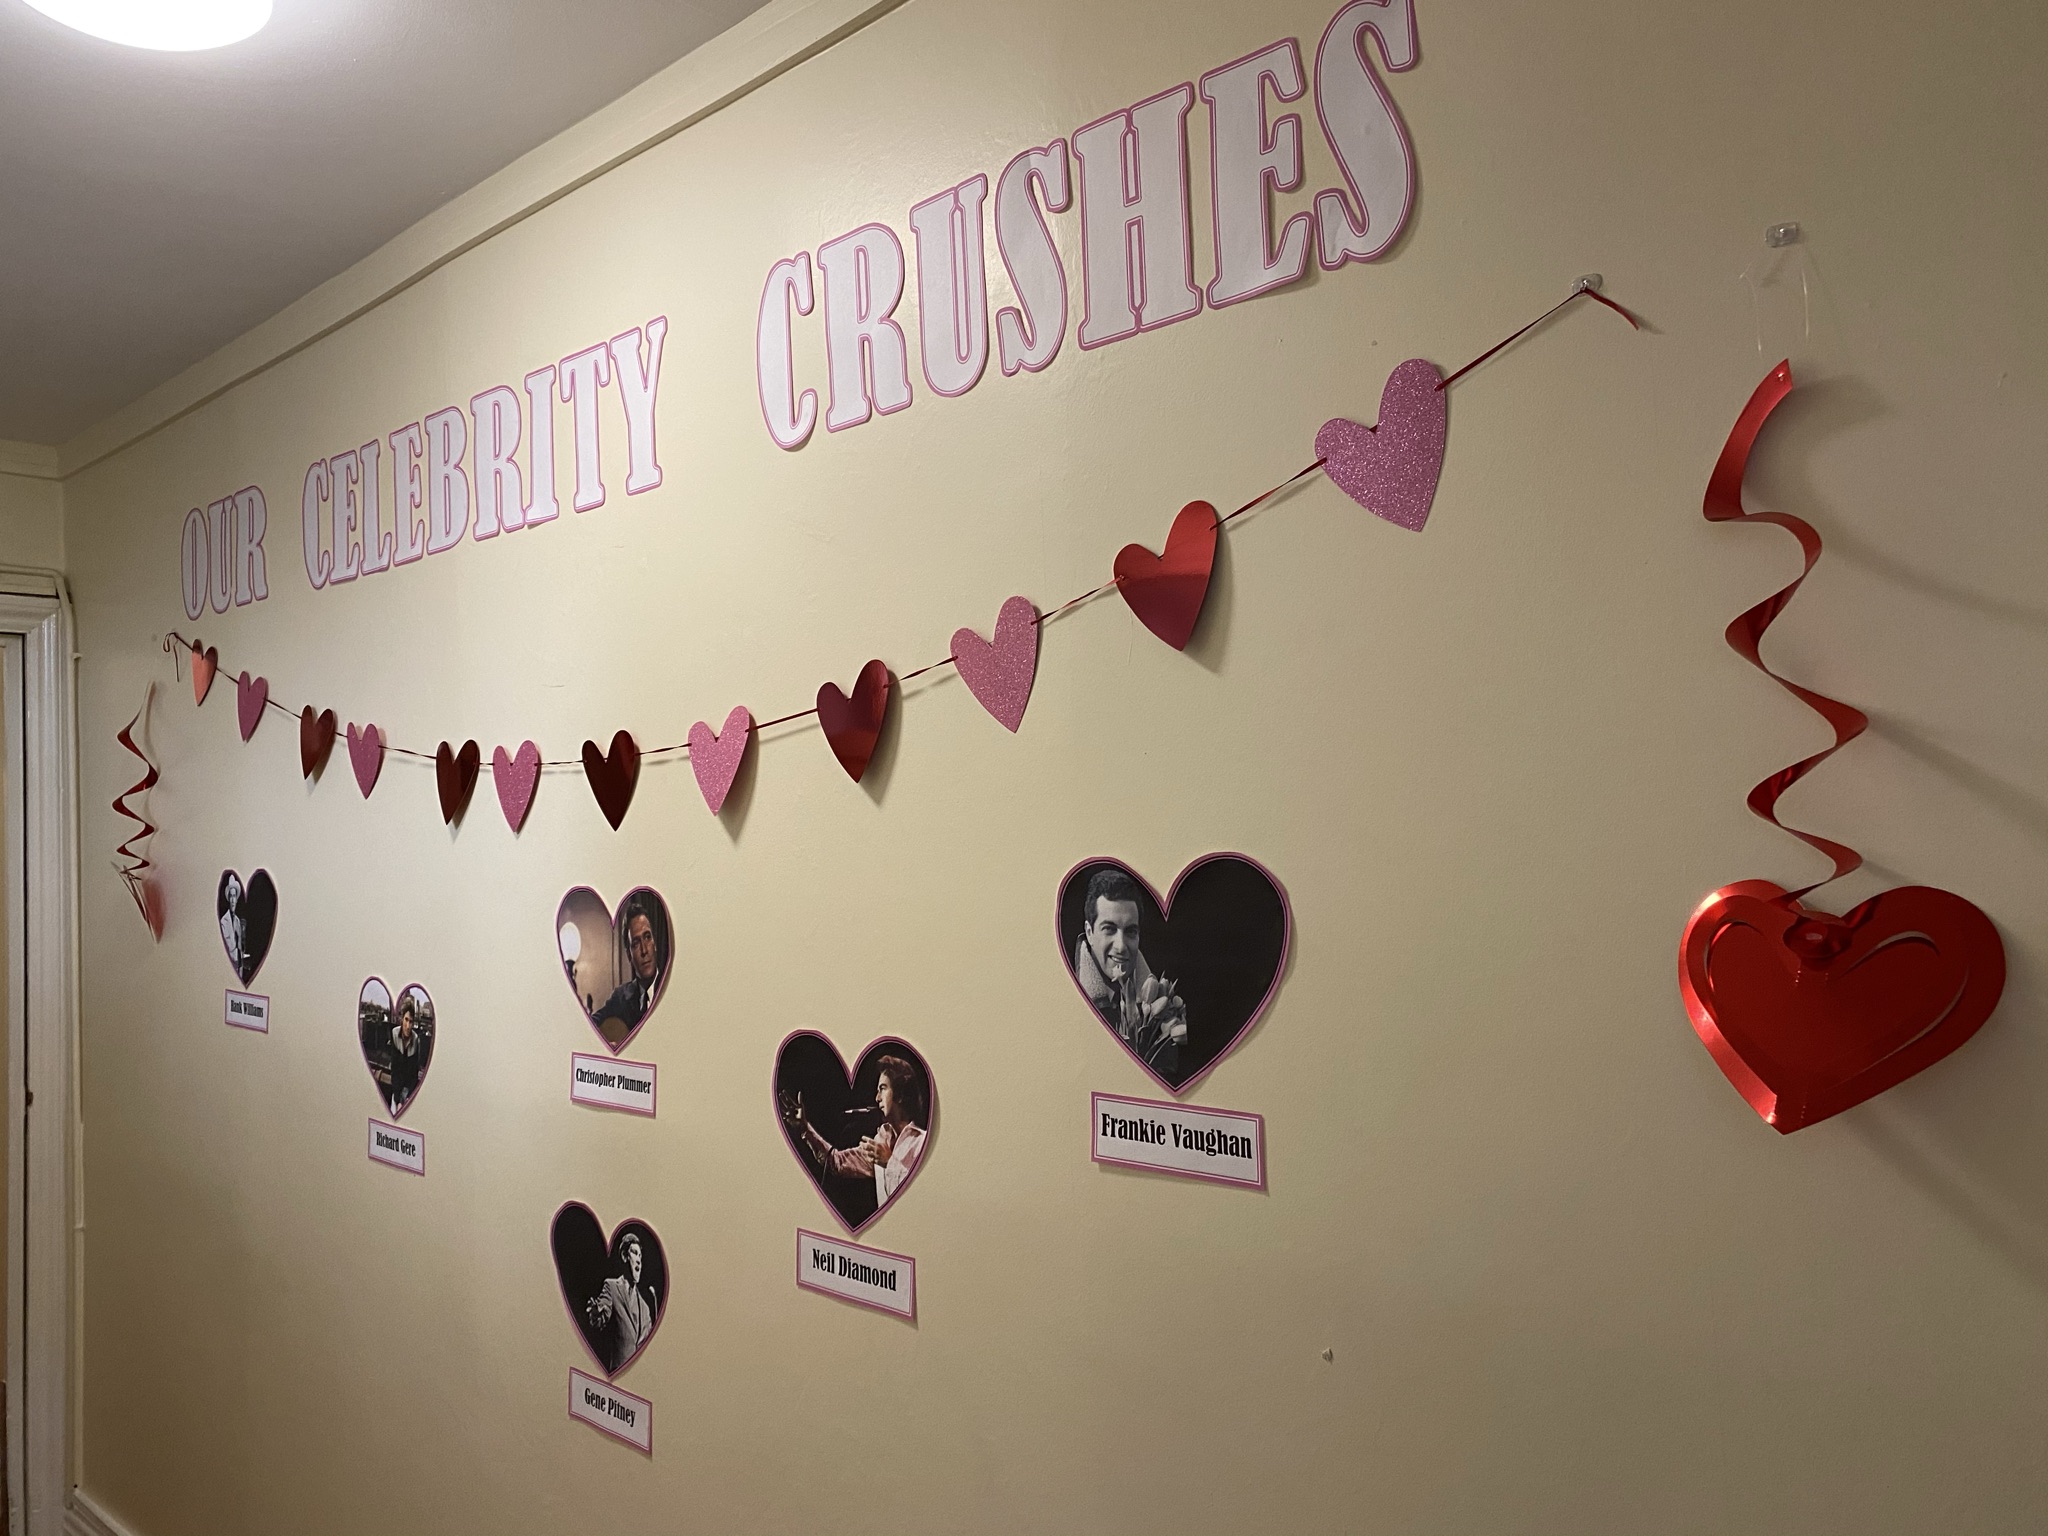 Our Celebrity Crush Display 2021